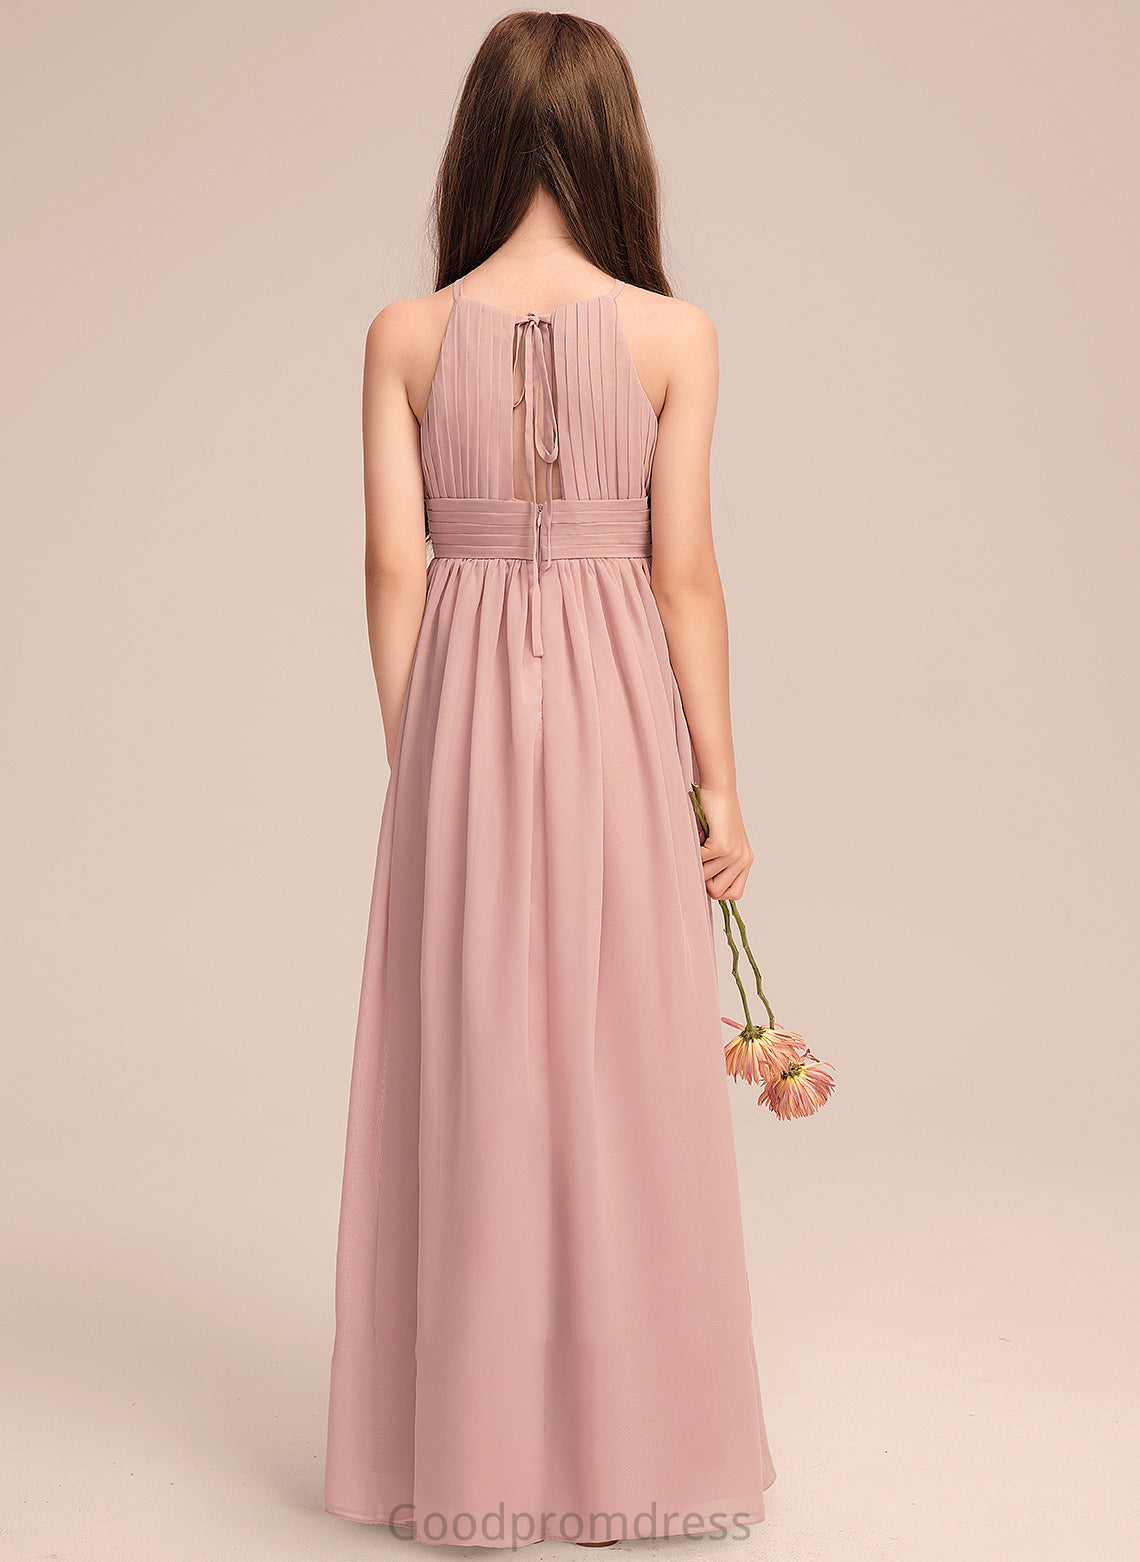 With Patience Floor-Length Junior Bridesmaid Dresses Scoop A-Line Ruffle Neck Chiffon